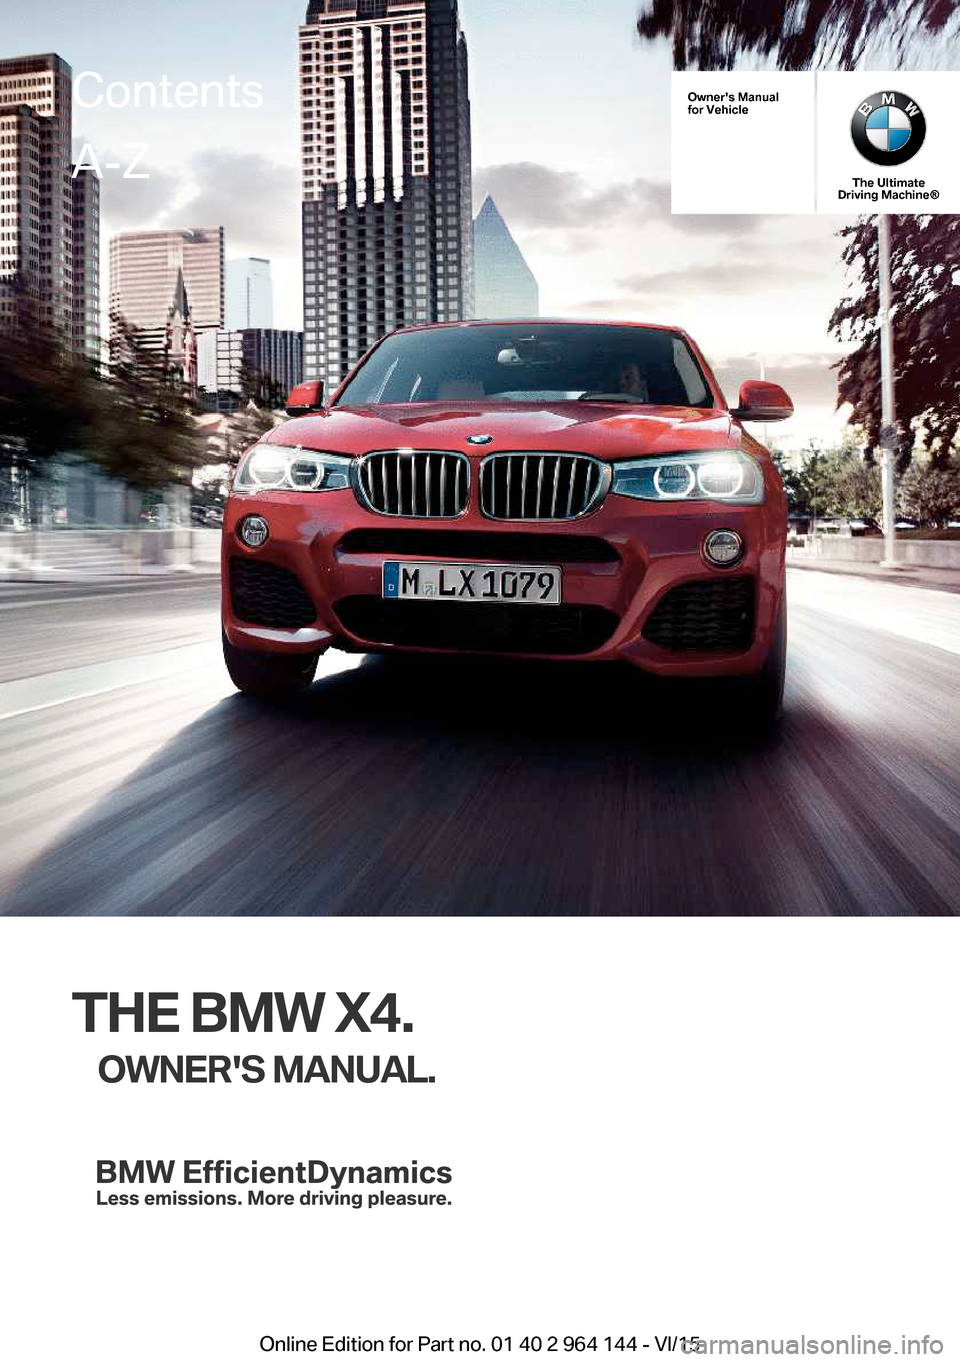 BMW X4 2015 F26 Owners Manual Owners Manual
for Vehicle
The Ultimate
Driving Machine®
THE BMW X4.
OWNERS MANUAL.
ContentsA-Z
Online Edition for Part no. 01 40 2 964 144 - VI/15   